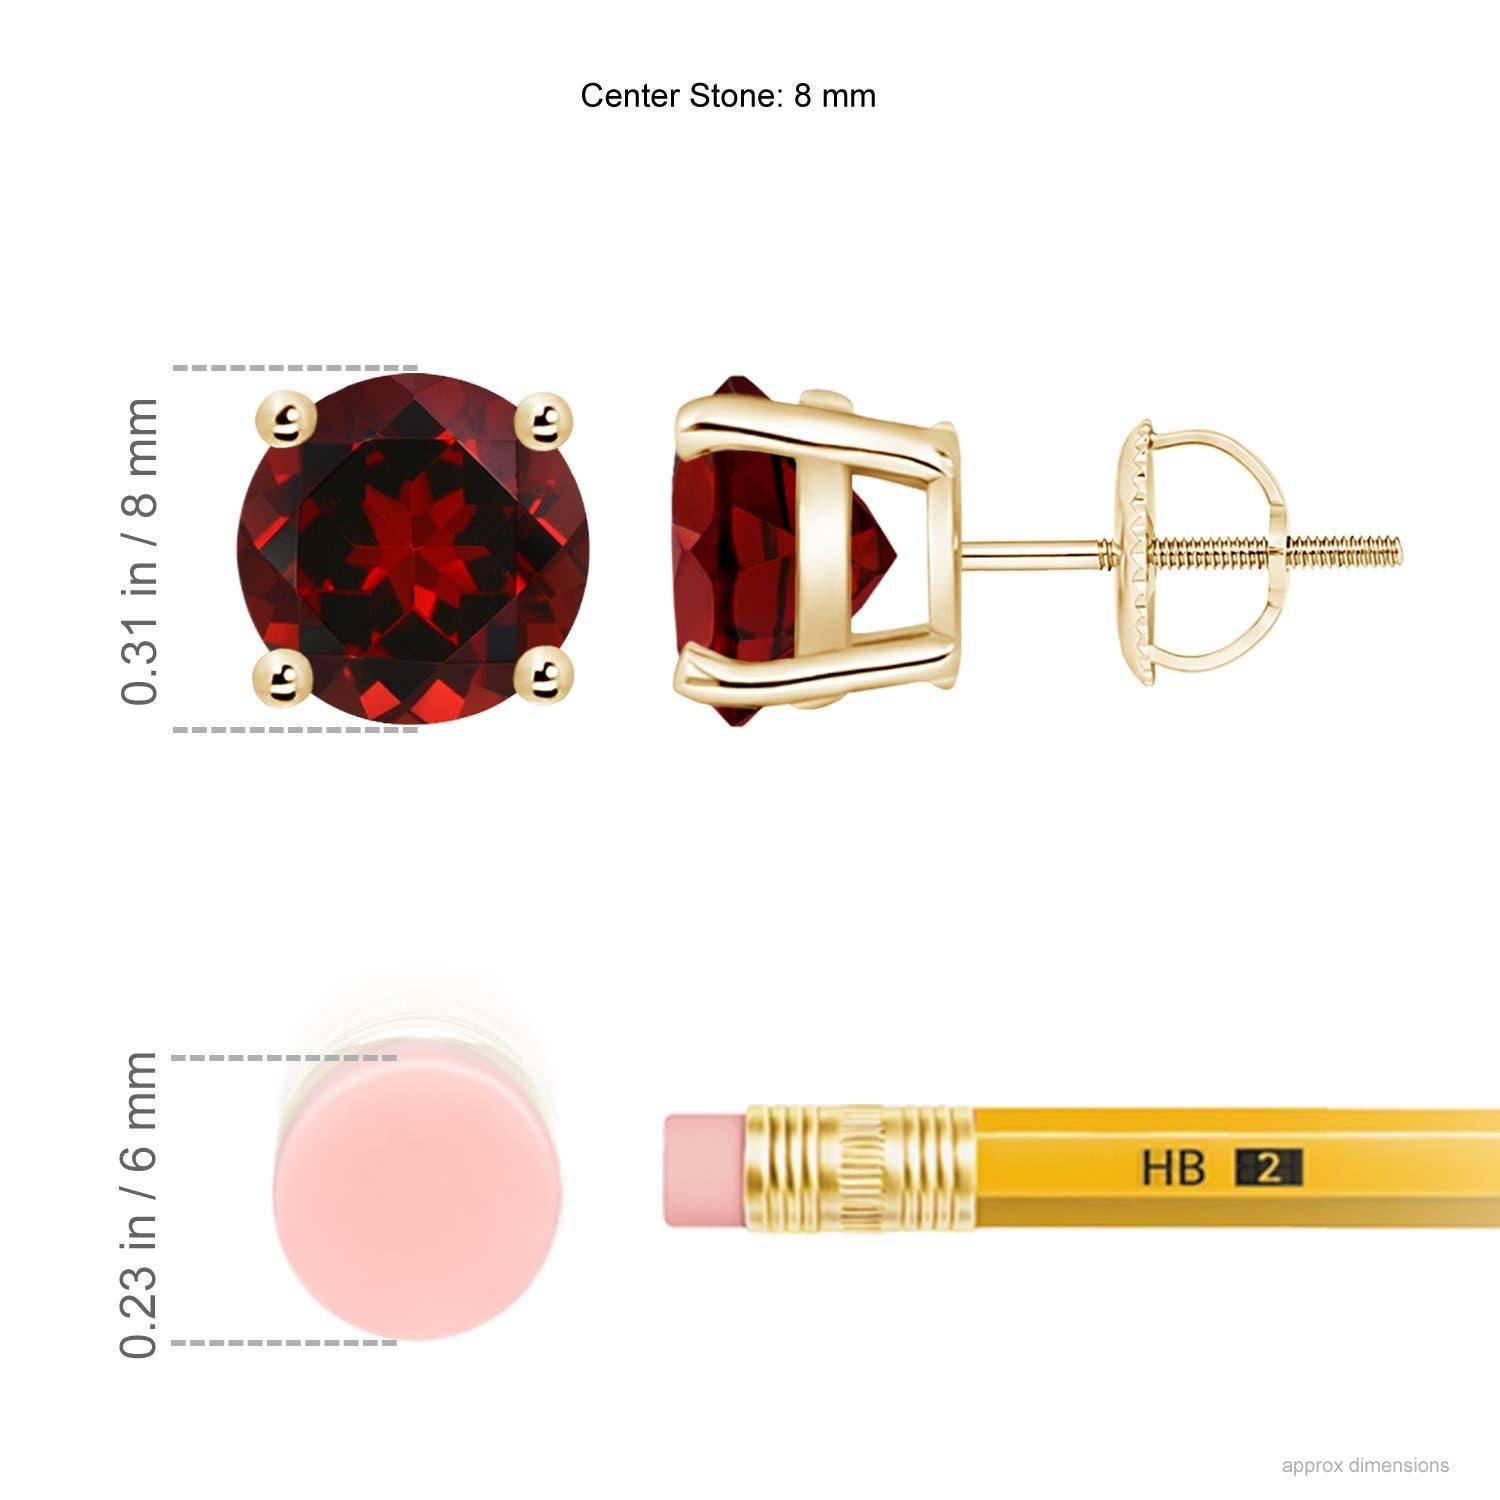 The beauty of these classic garnet stud earrings lies in their simple design and deep red hue. Secured in a 14K yellow gold basket prong setting, the round garnets look elegant.